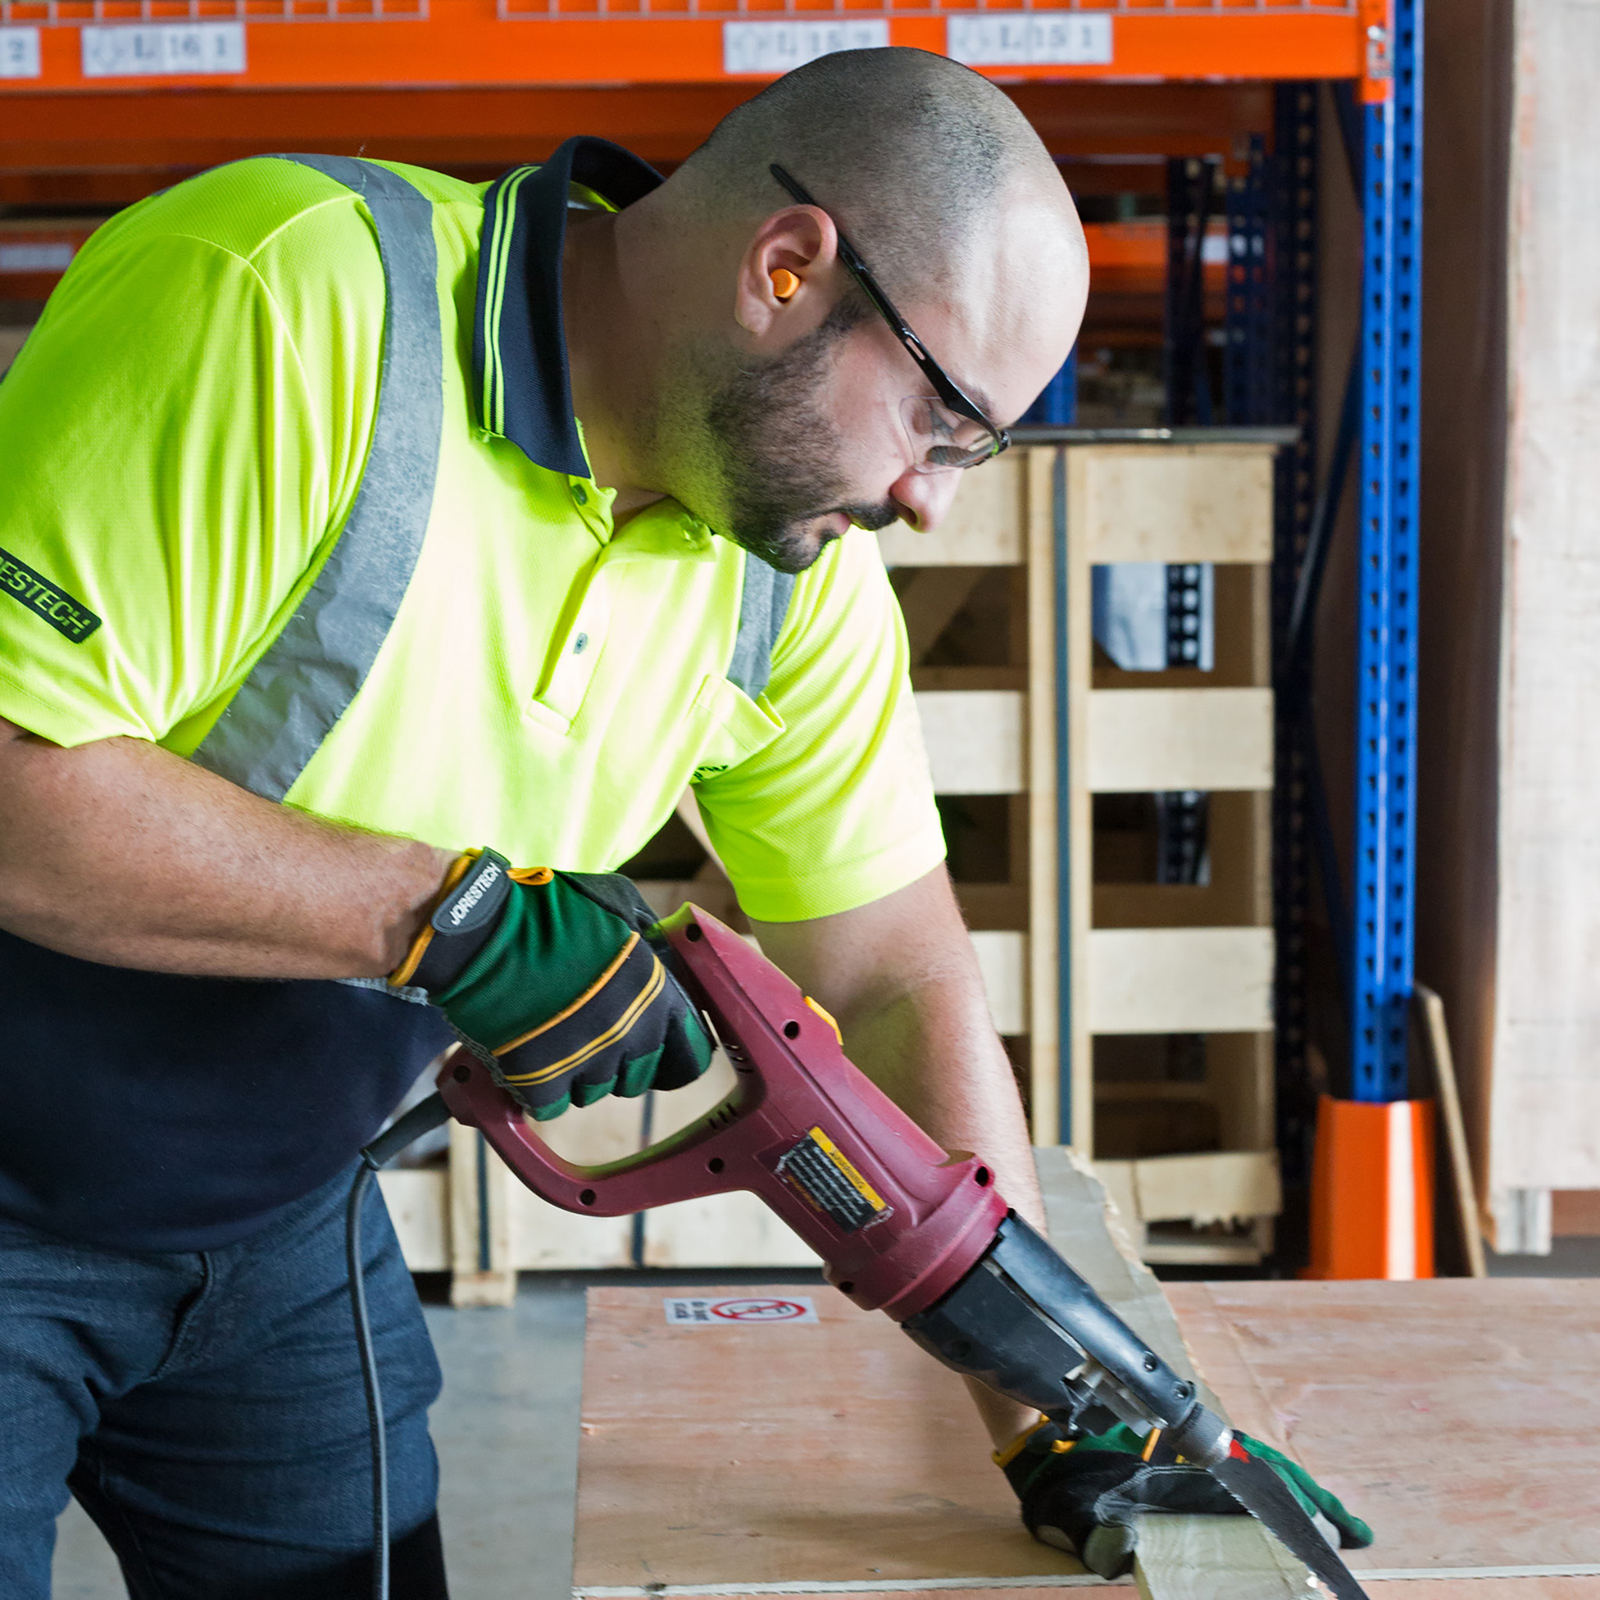 A worker wearing JORESTECH foam earplugs for noise cancelation while operating a loud power tool to cut wood.